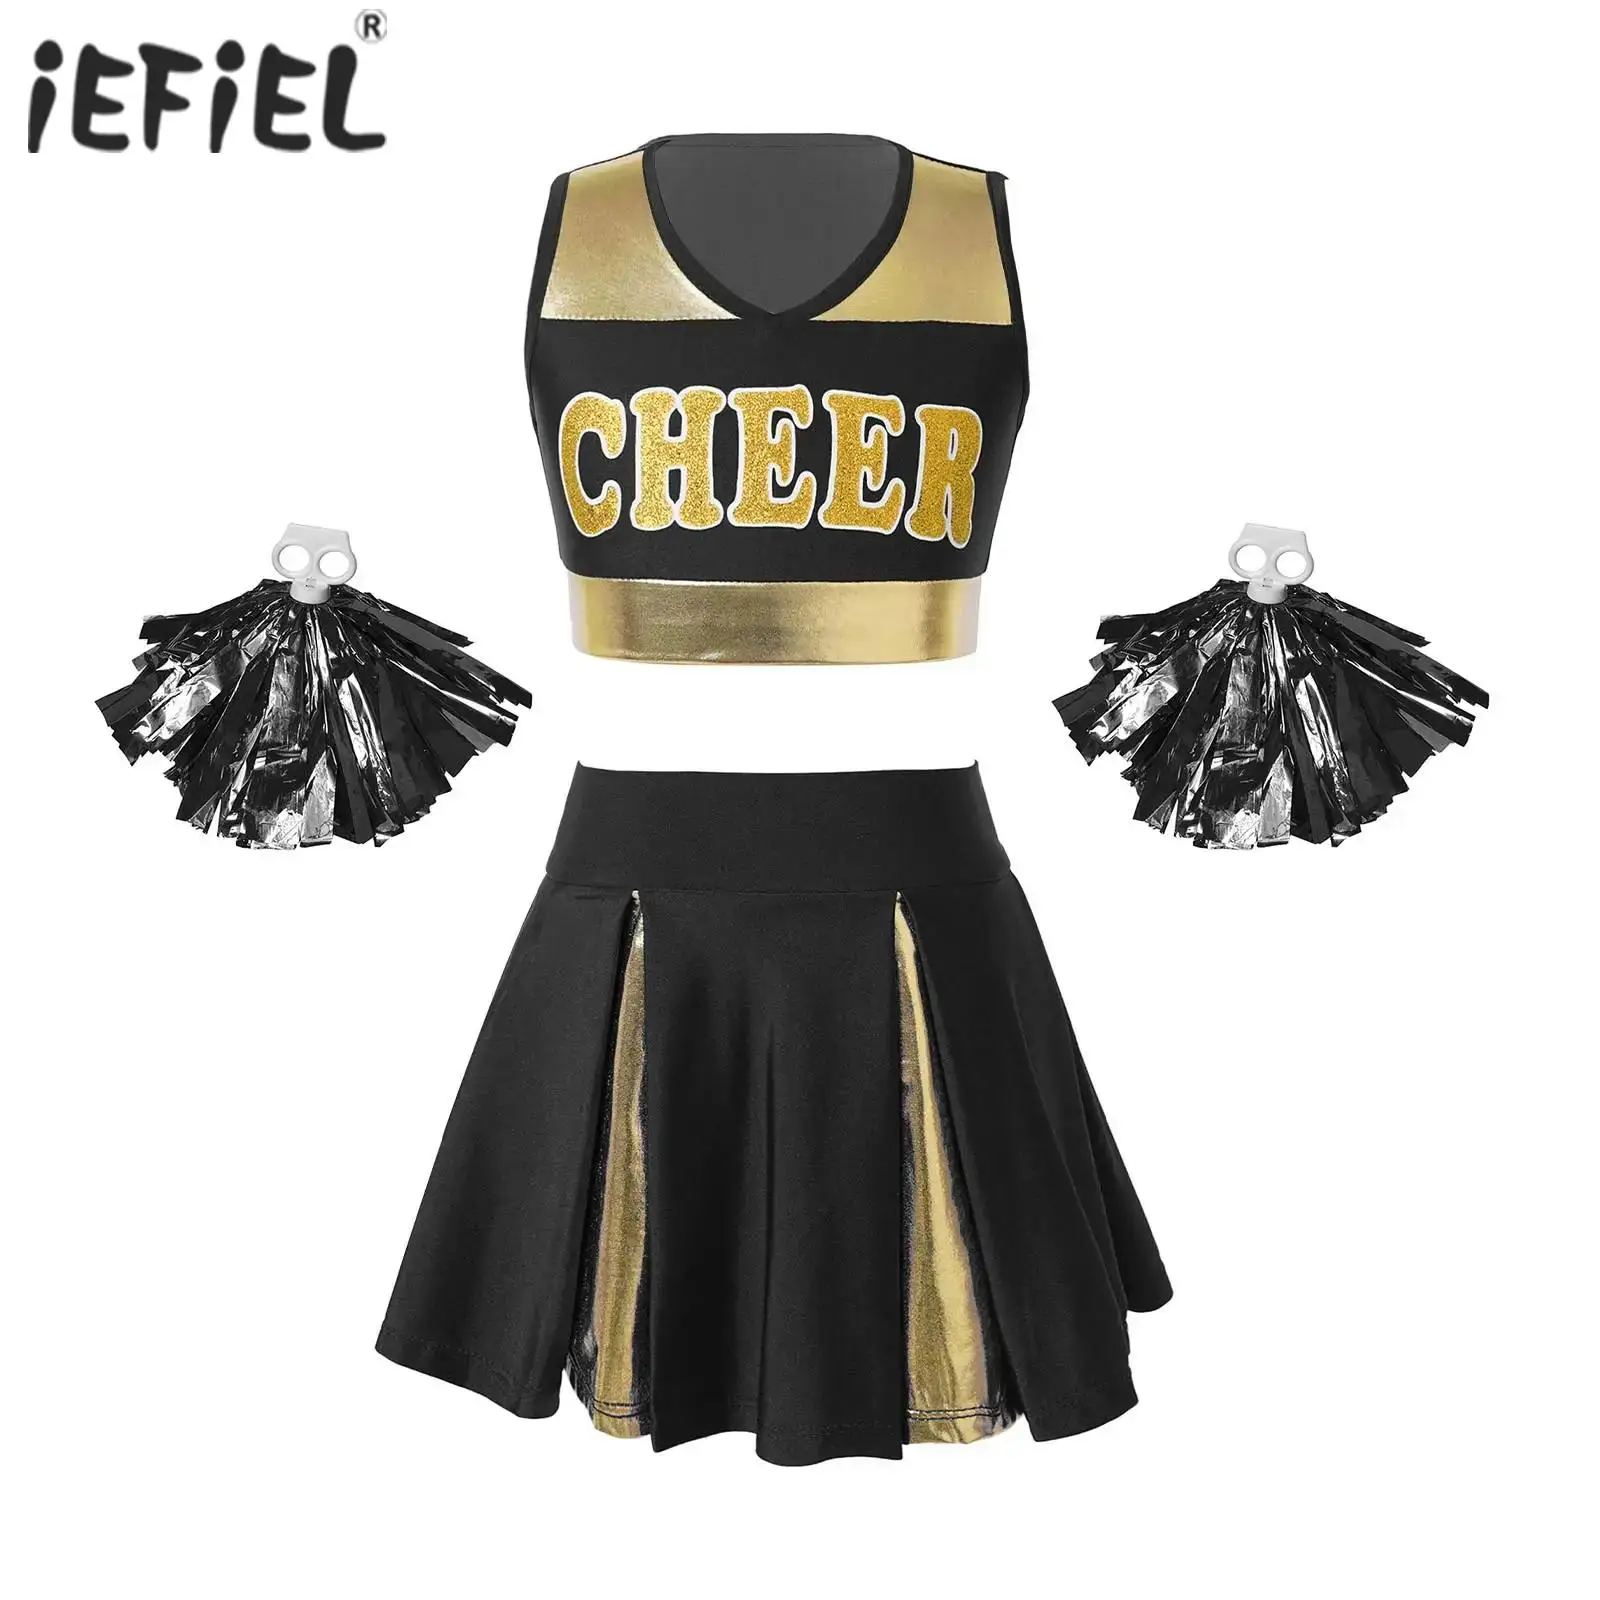 

Kids Girls Cheer Leader Costume Halloween Party Dress Up Cheerleading Dance Uniform Crop Top Pleated Skirt Sets with Pom Poms